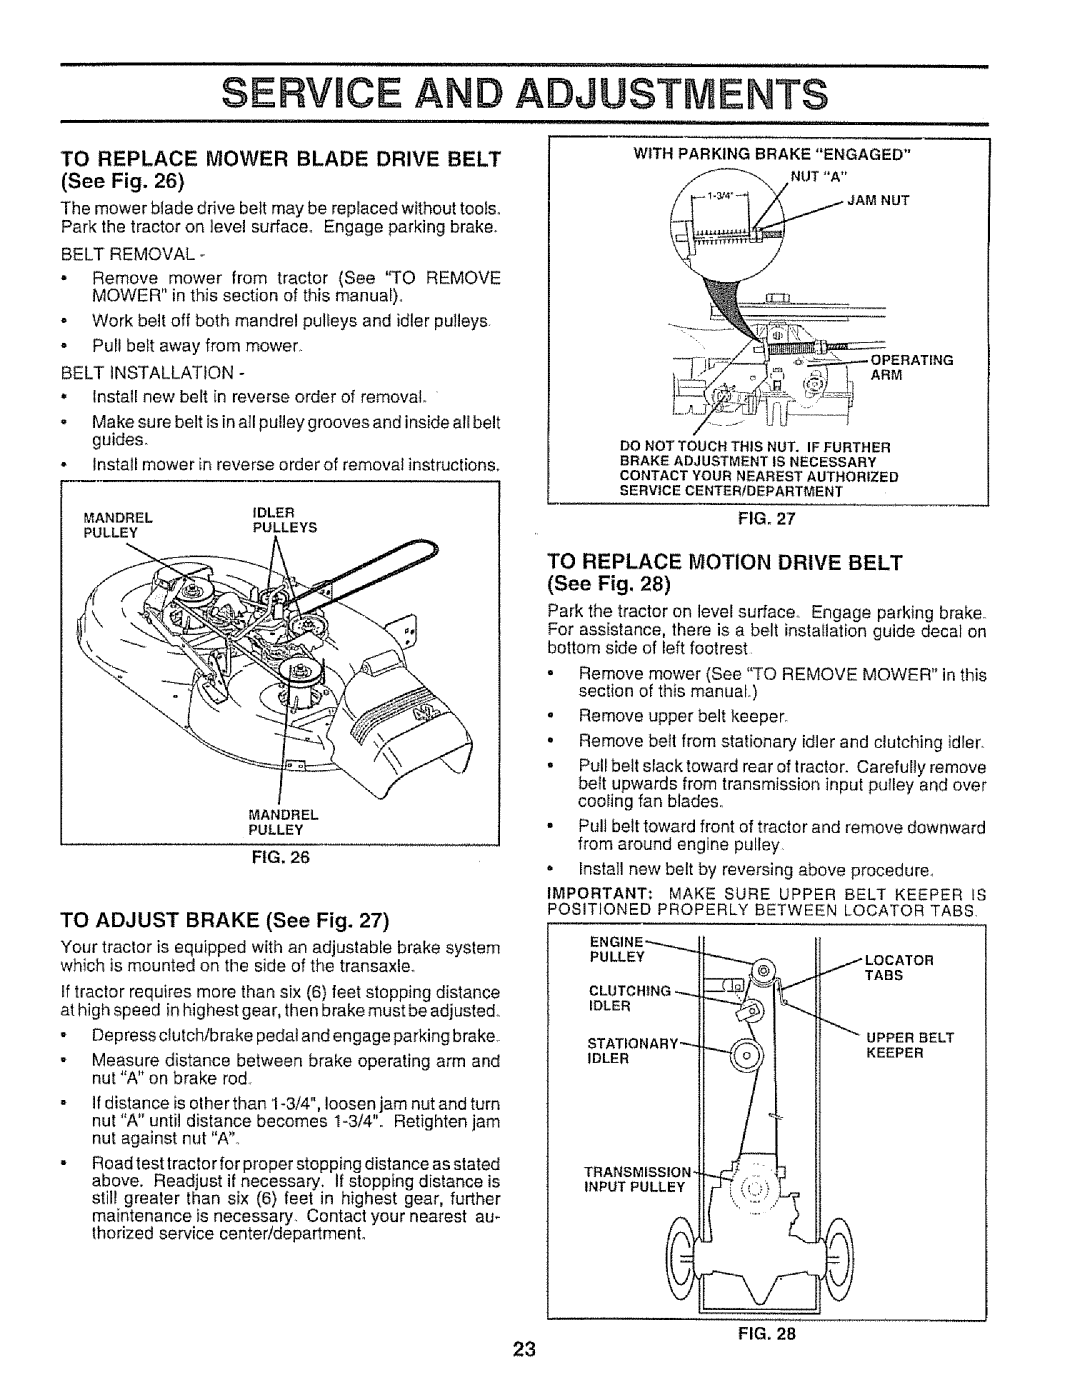 Sears 917.25953 owner manual Service An, Adjustments, Keeper, TO REPLACE MOTION DRIVE BELT See Fig, ENGINE---.-.tl 